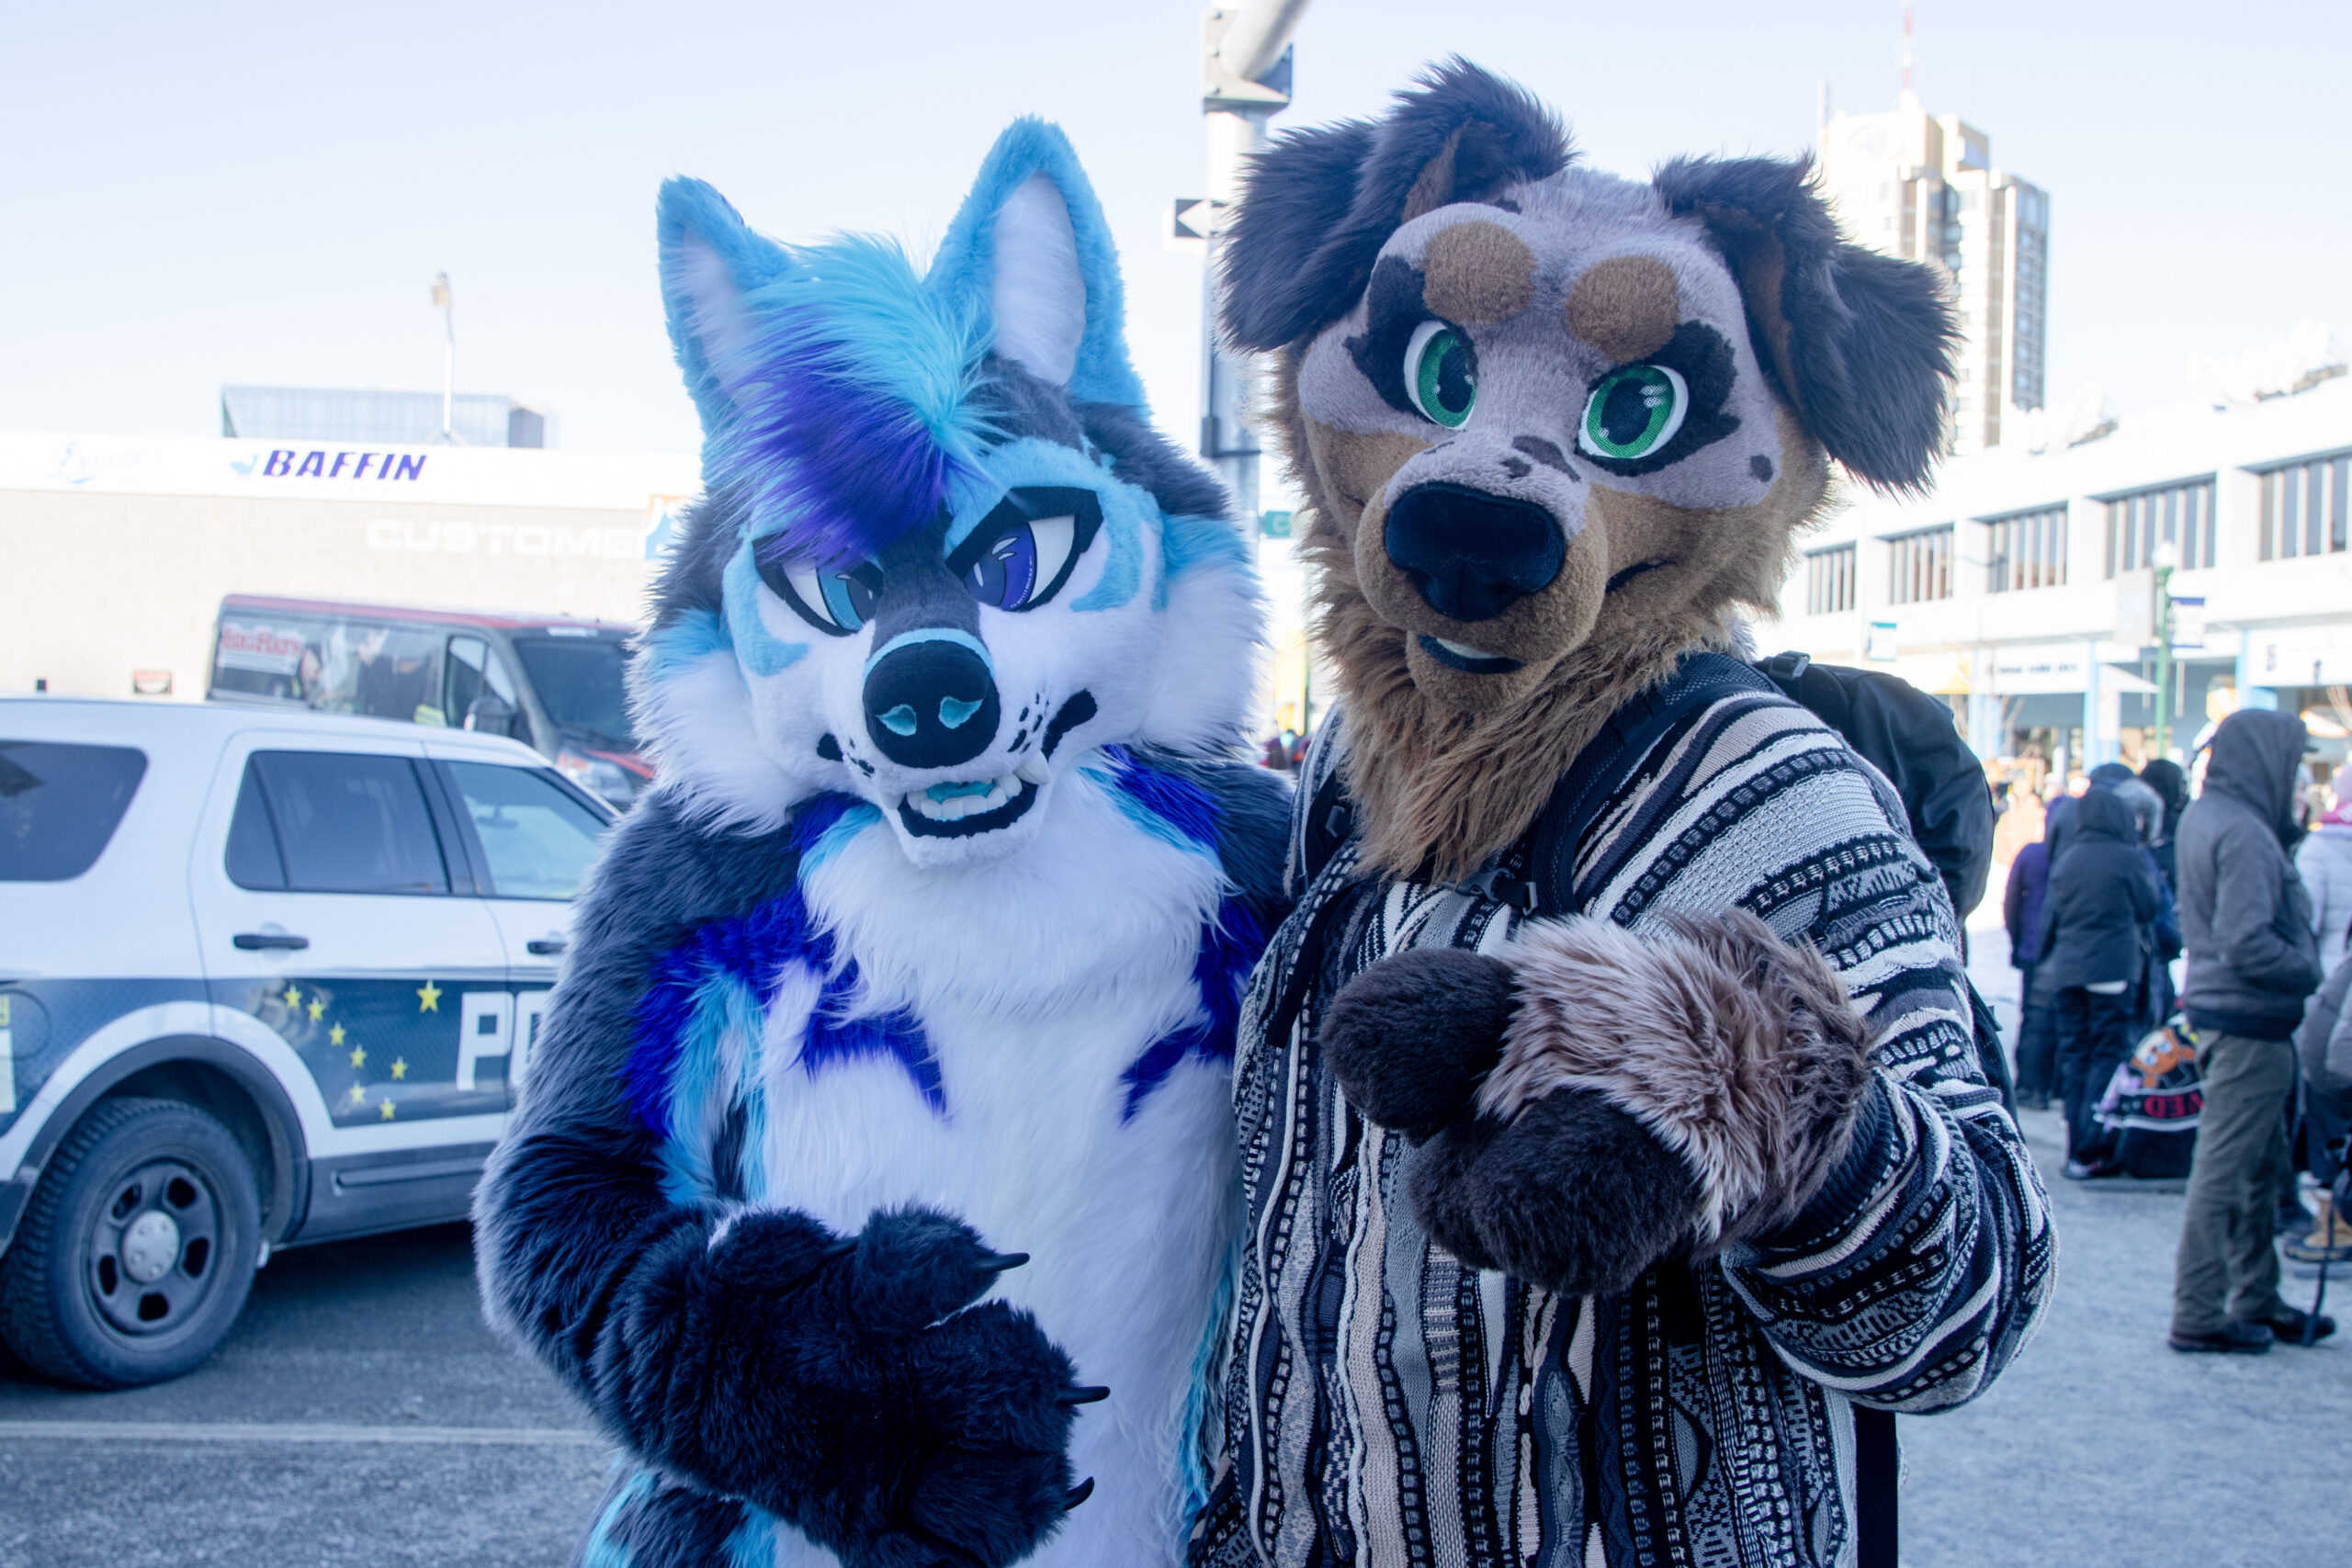 Two people dressed in wolf costumes one is blue and the other is brown pose for the camera as people walk behind them.